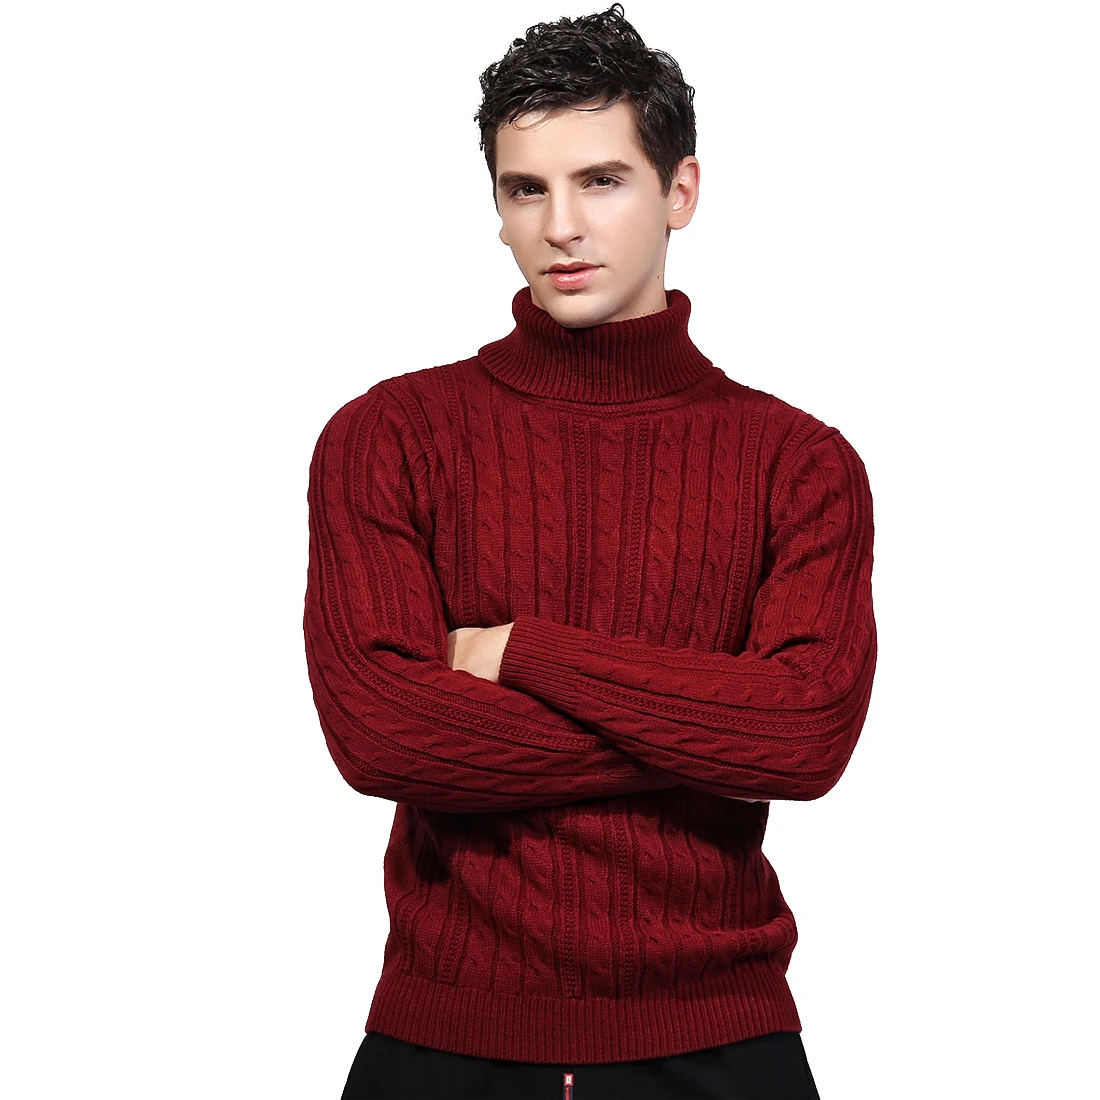 Winter Warm Men's Turtleneck Sweaters Knitted Pullover Solid Jumper ...